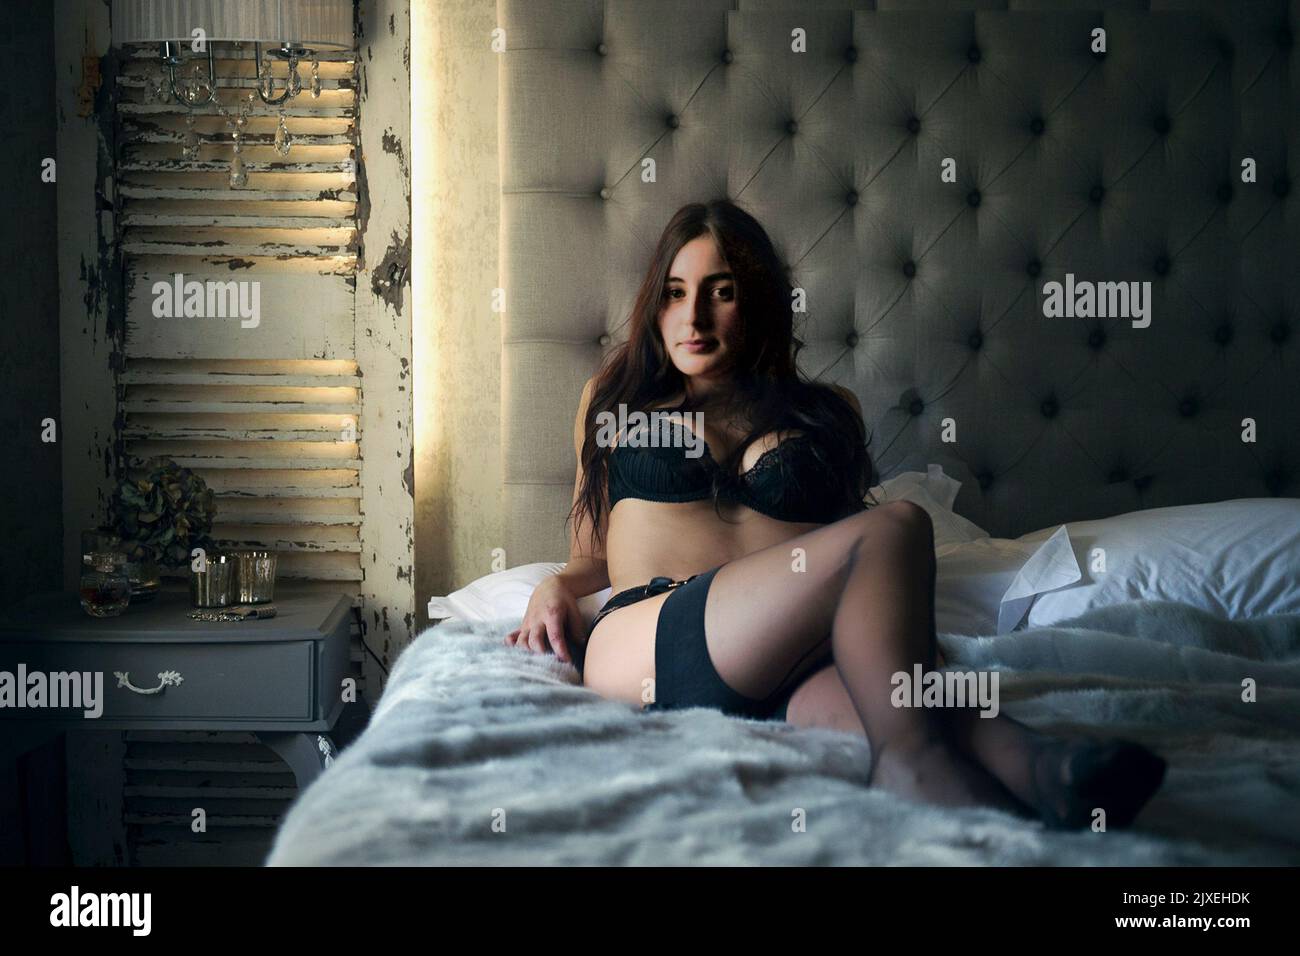 Glamorous long-haired brunette young woman wearing black lingerie sits on a bed in a hotel room.  MODEL RELEASED Stock Photo